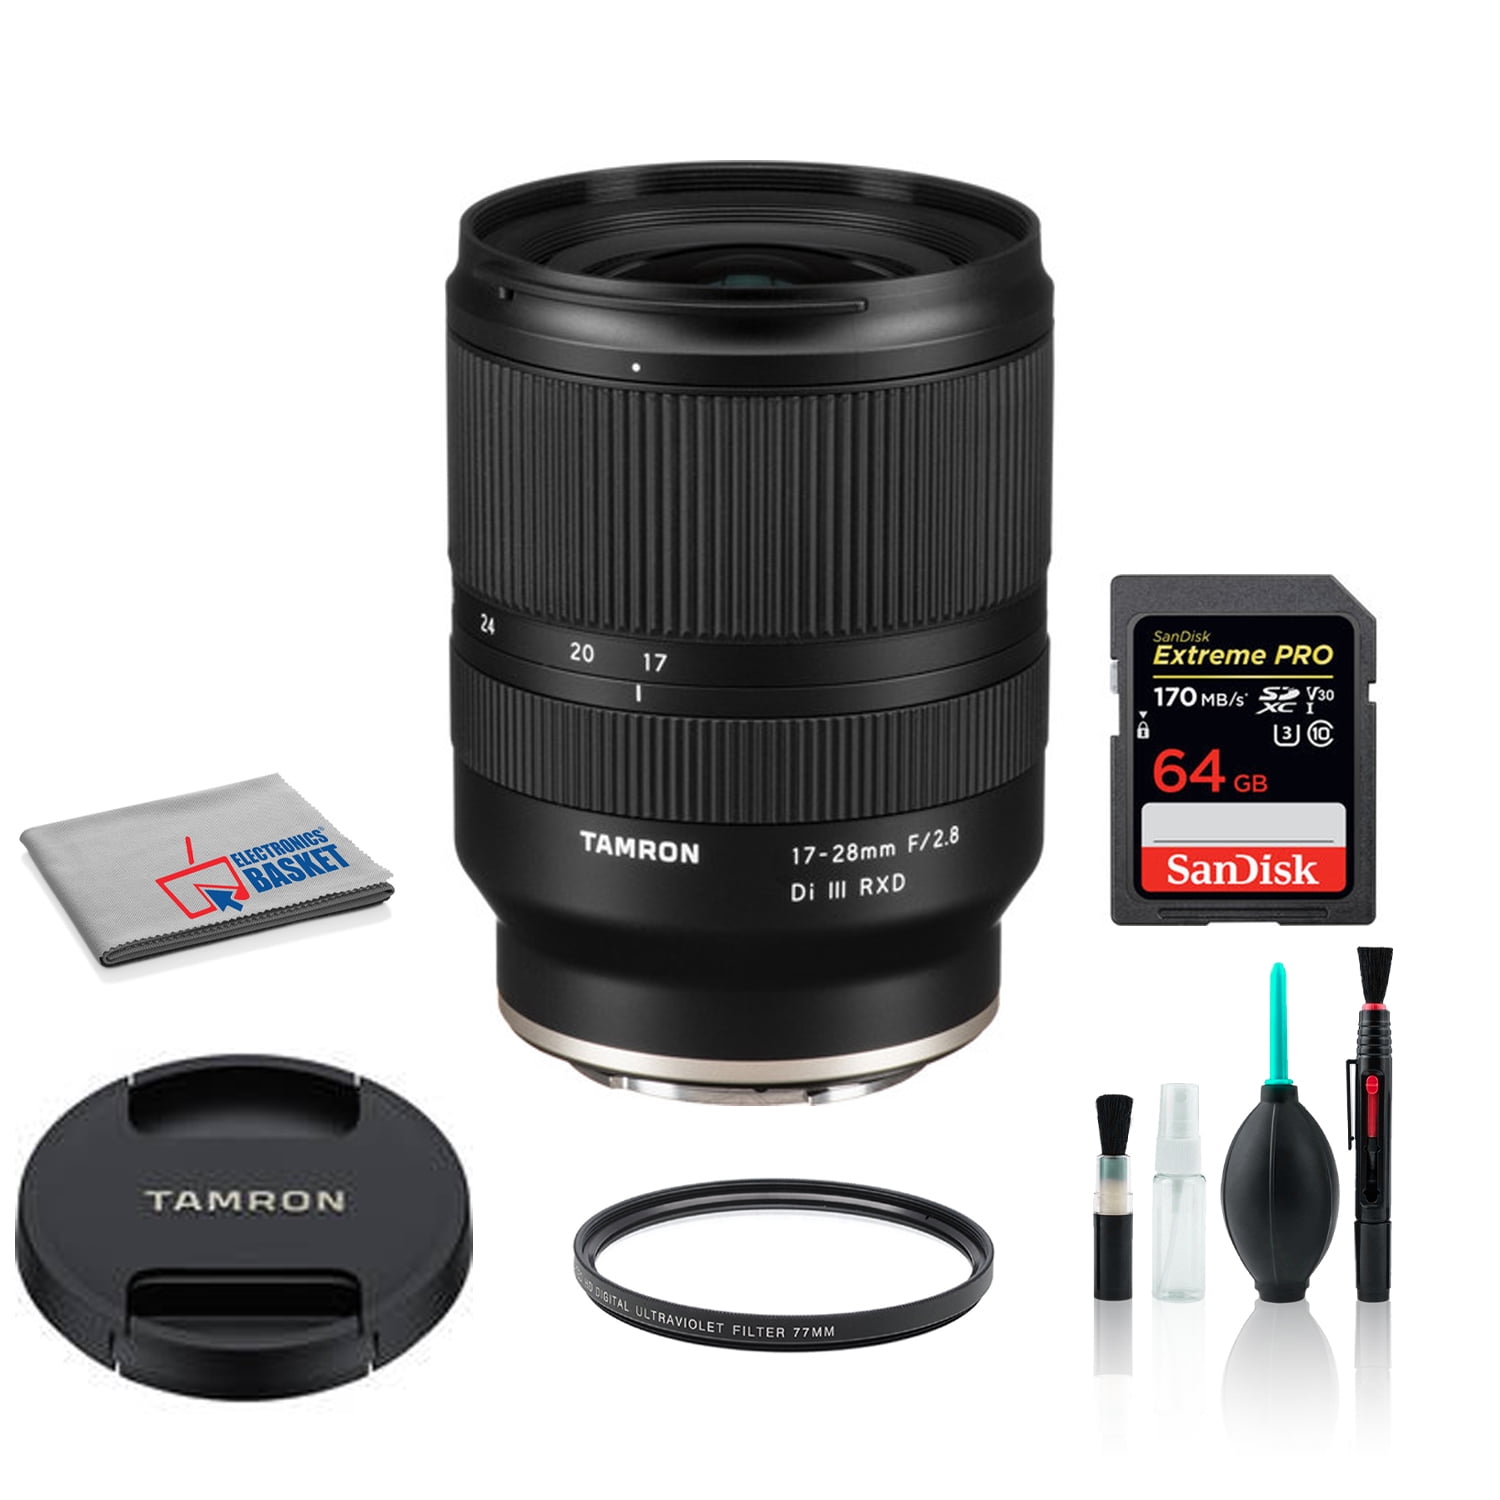 Tamron 17-28mm f/2.8 Di III RXD Lens for Sony Mirrorless Full Frame E Mount  with 64GB Memory Card (International Model)